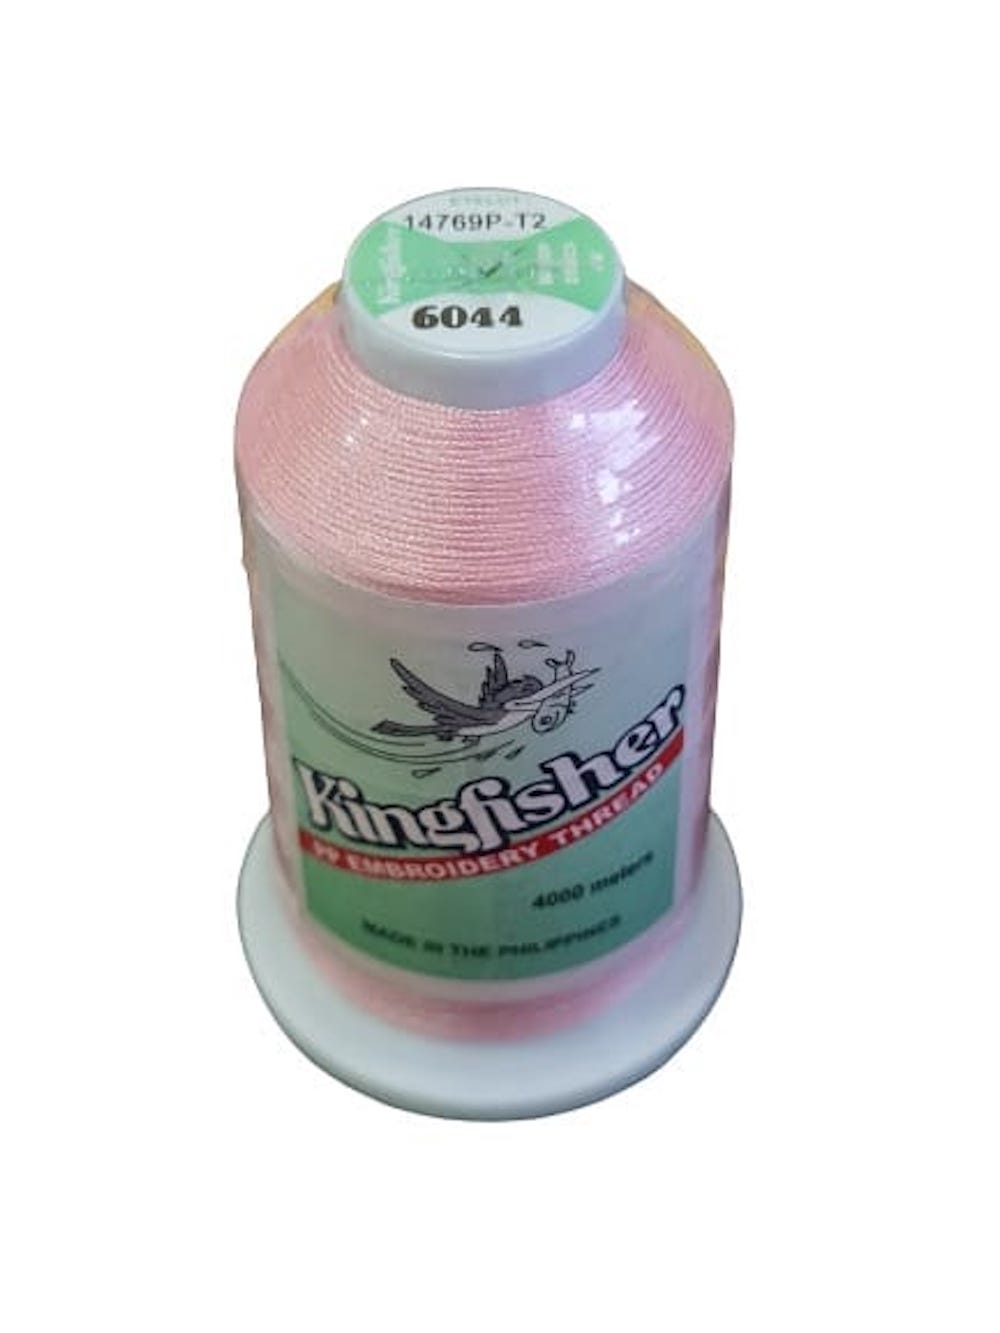 King Fisher Embroidery Thread 4000m 6044 - MY SEWING MALL